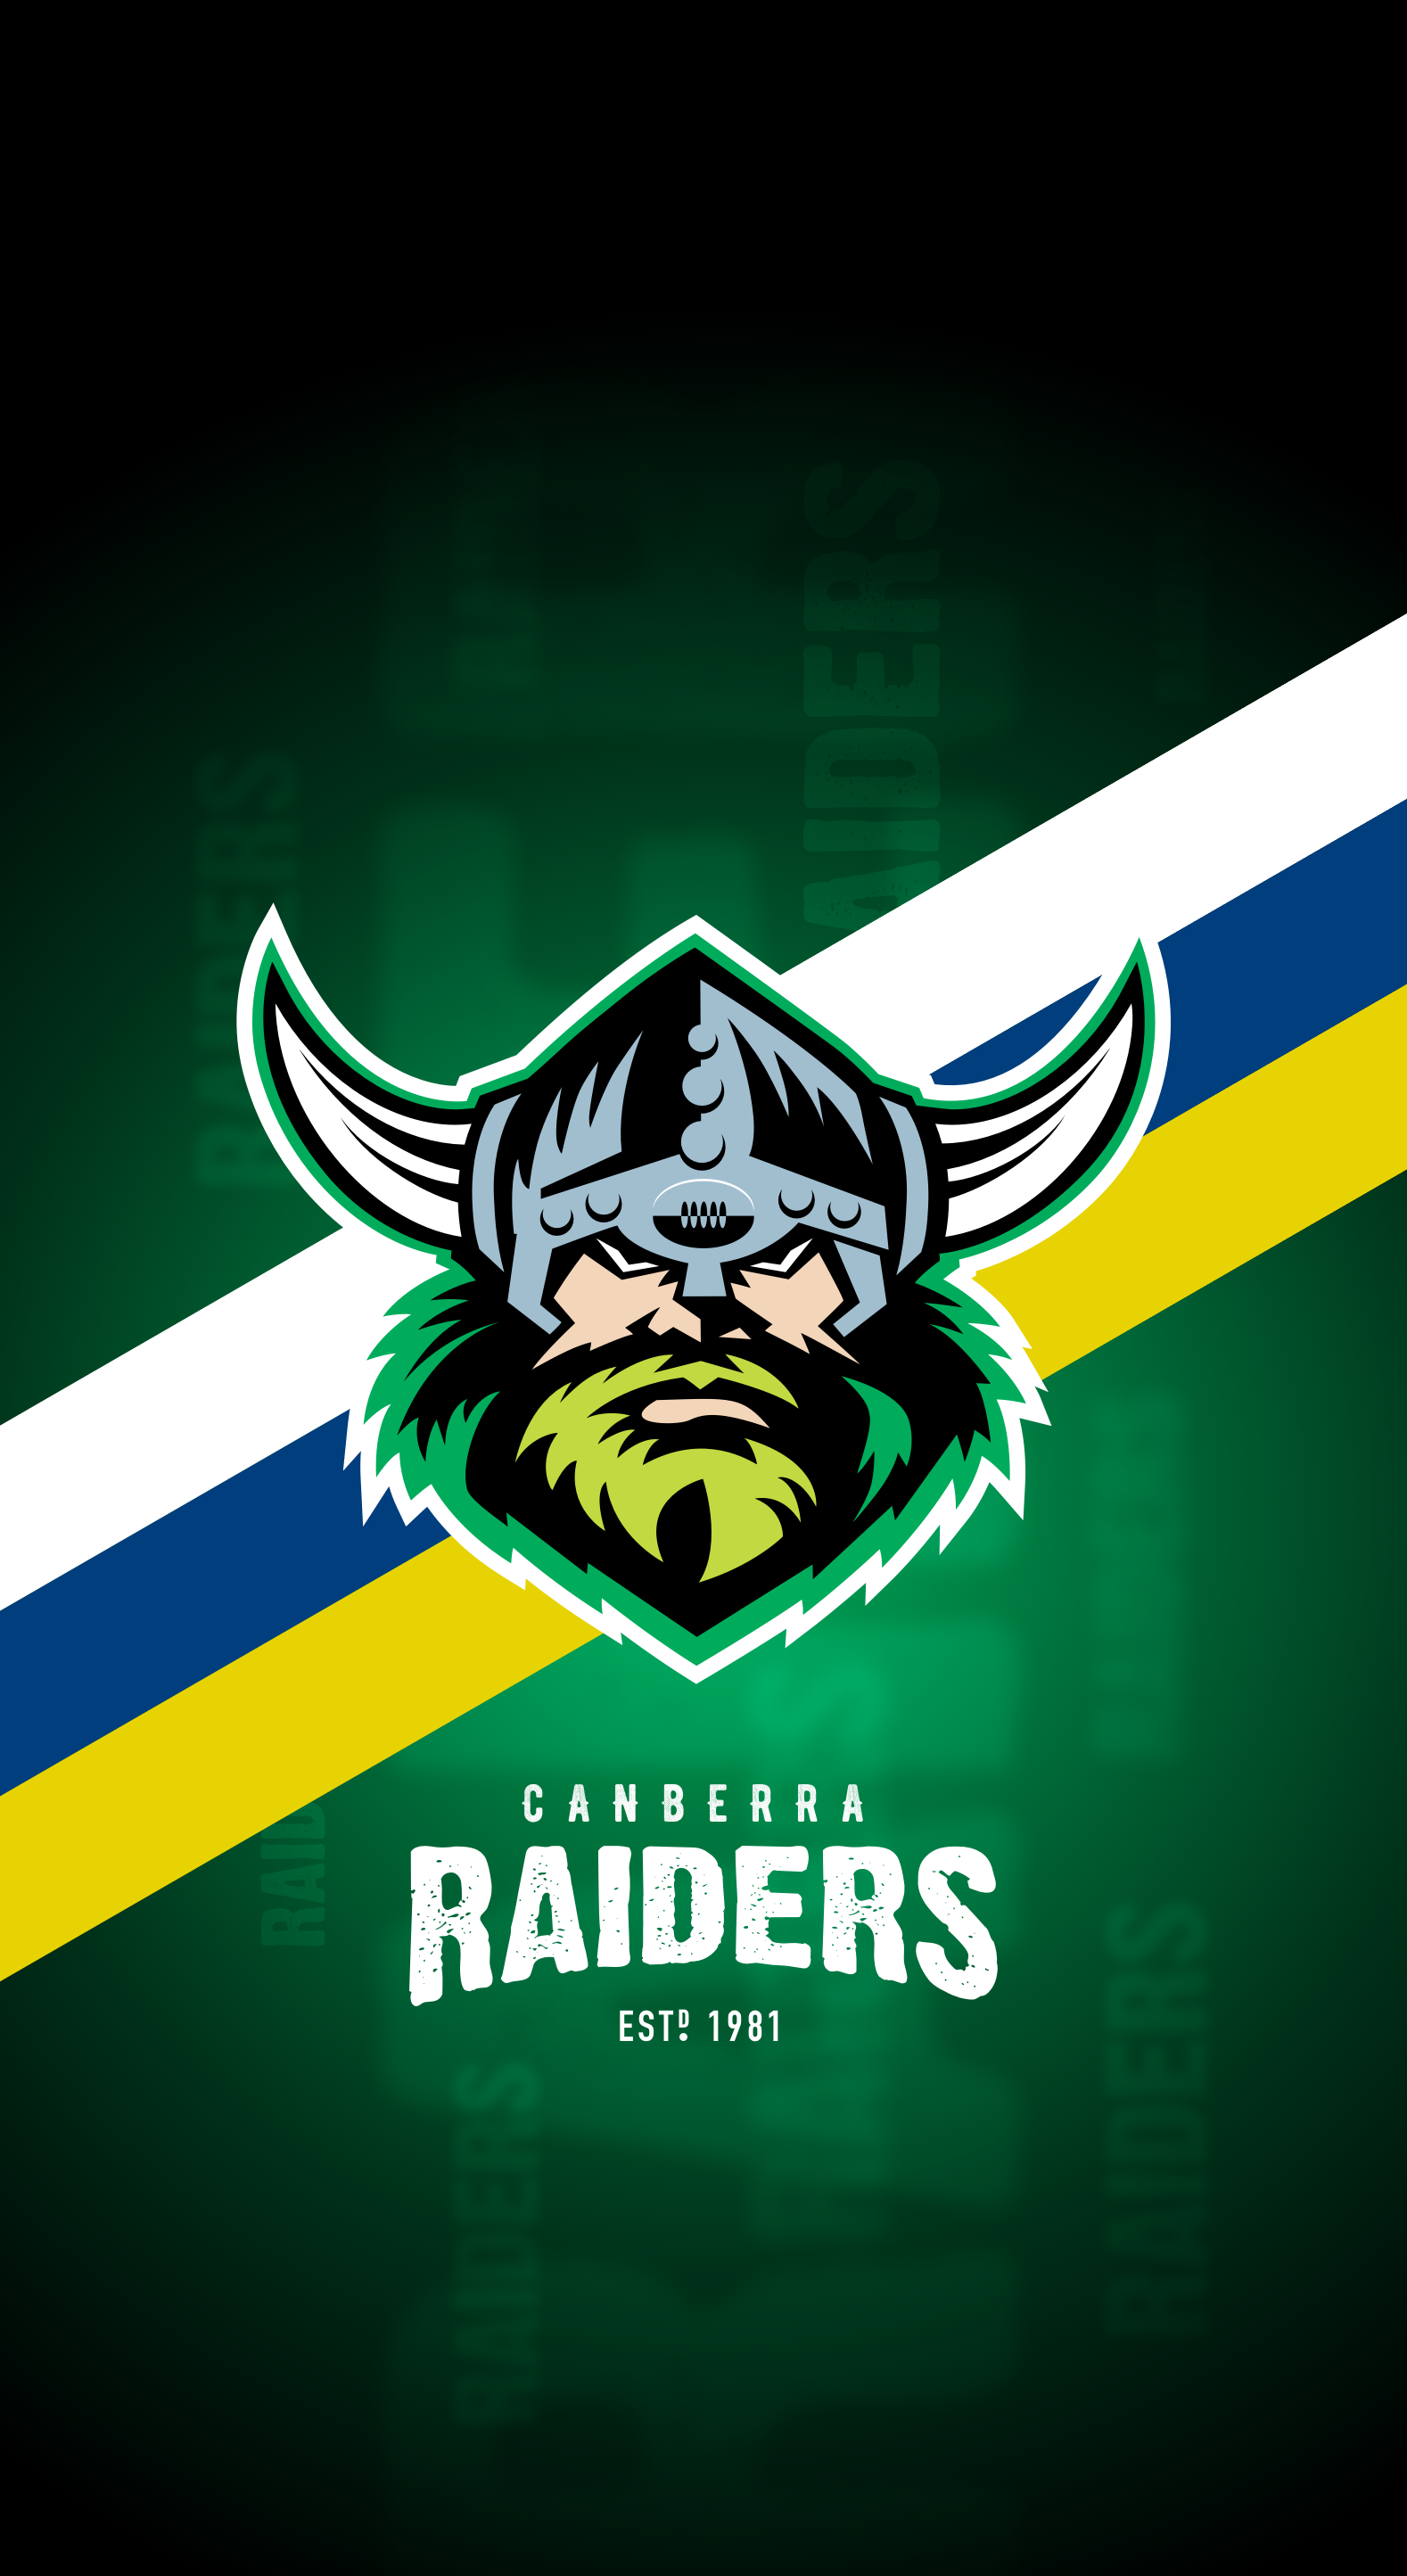 Nrl Wallpapers 2022